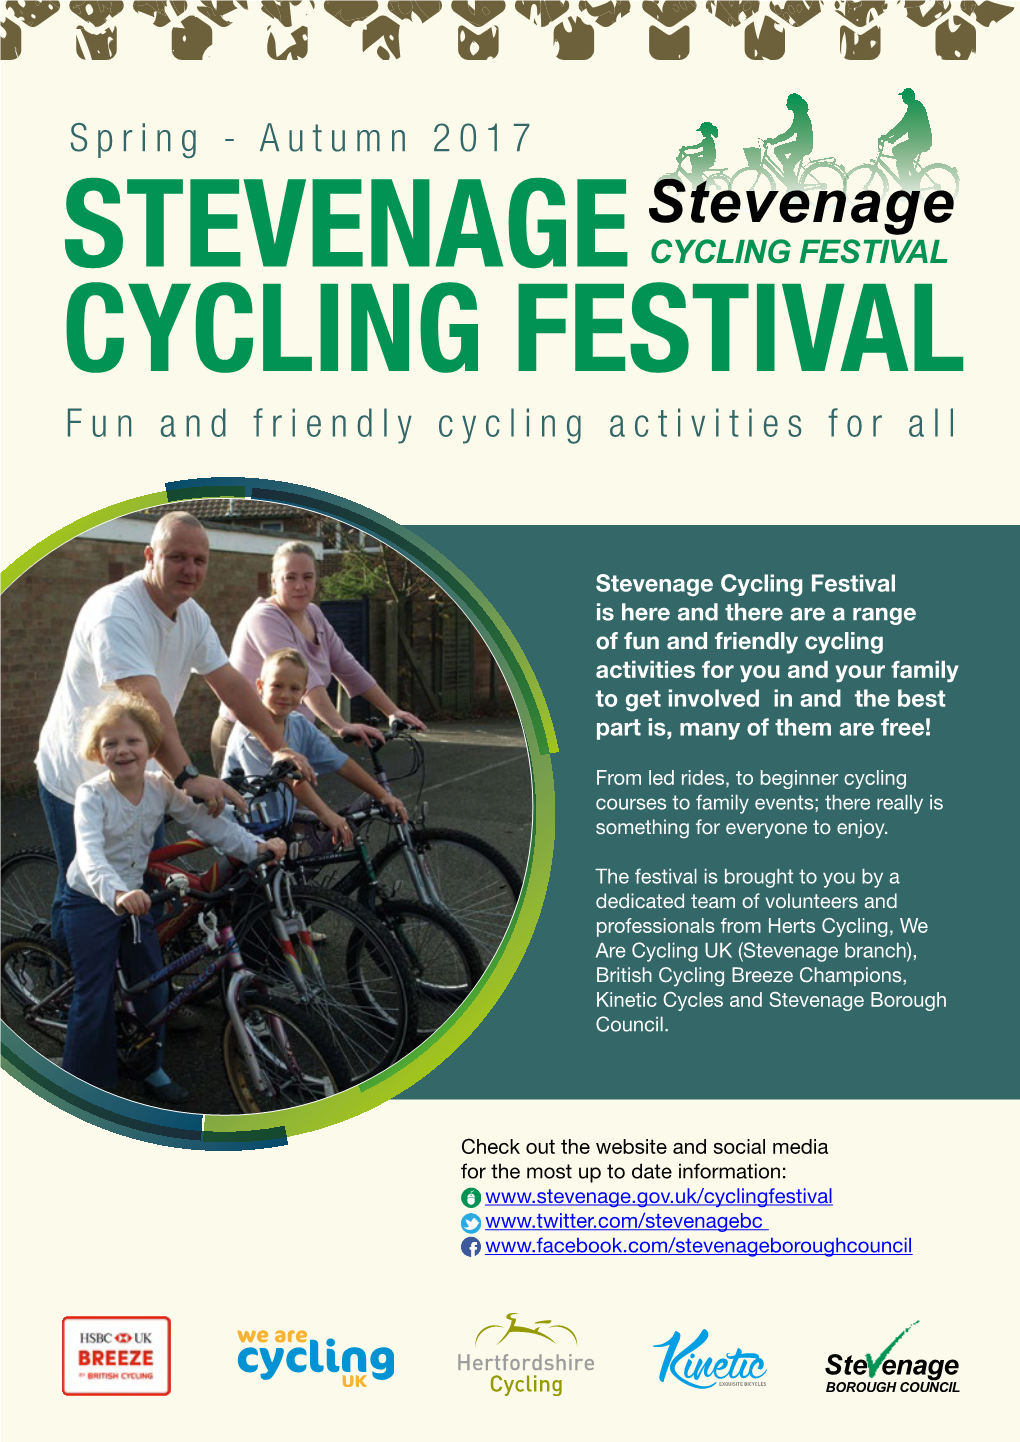 Spring - Autumn 2017 STEVENAGE CYCLING FESTIVAL Fun and Friendly Cycling Activities for All